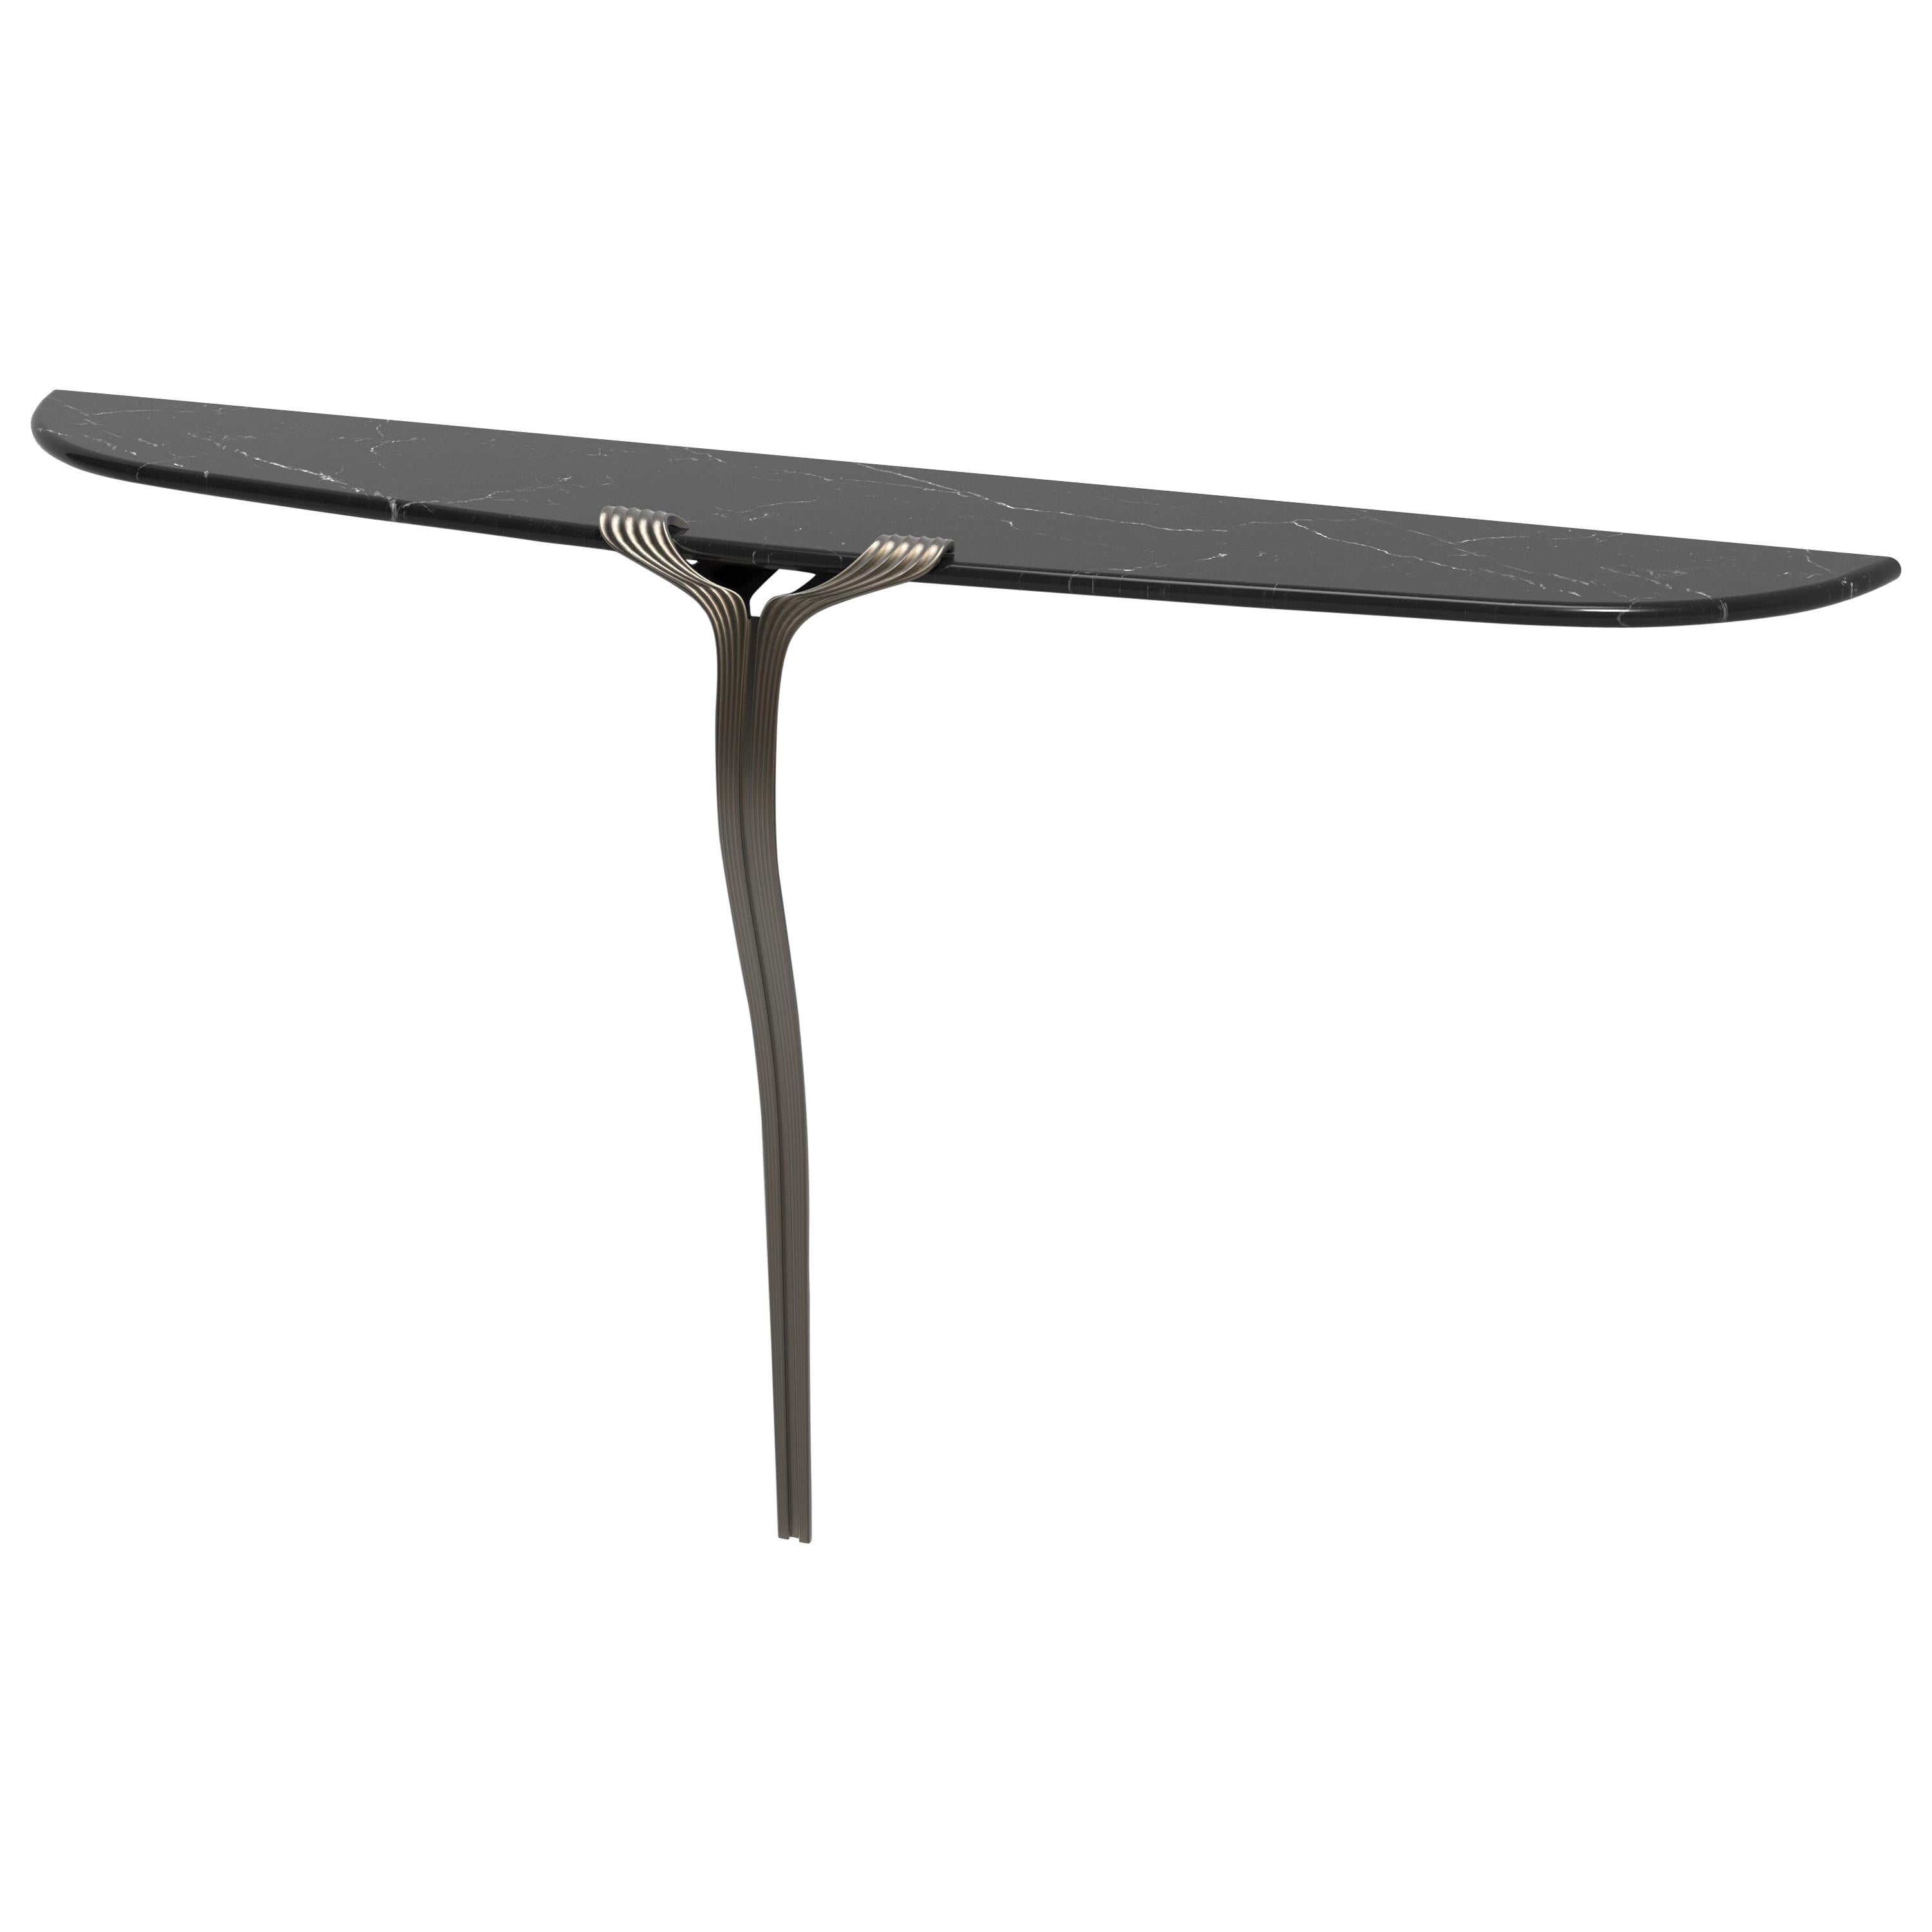 Horta Consle One Leg Contemporary Entry Table, a Nod to Art Deco, Marble, Bronze For Sale